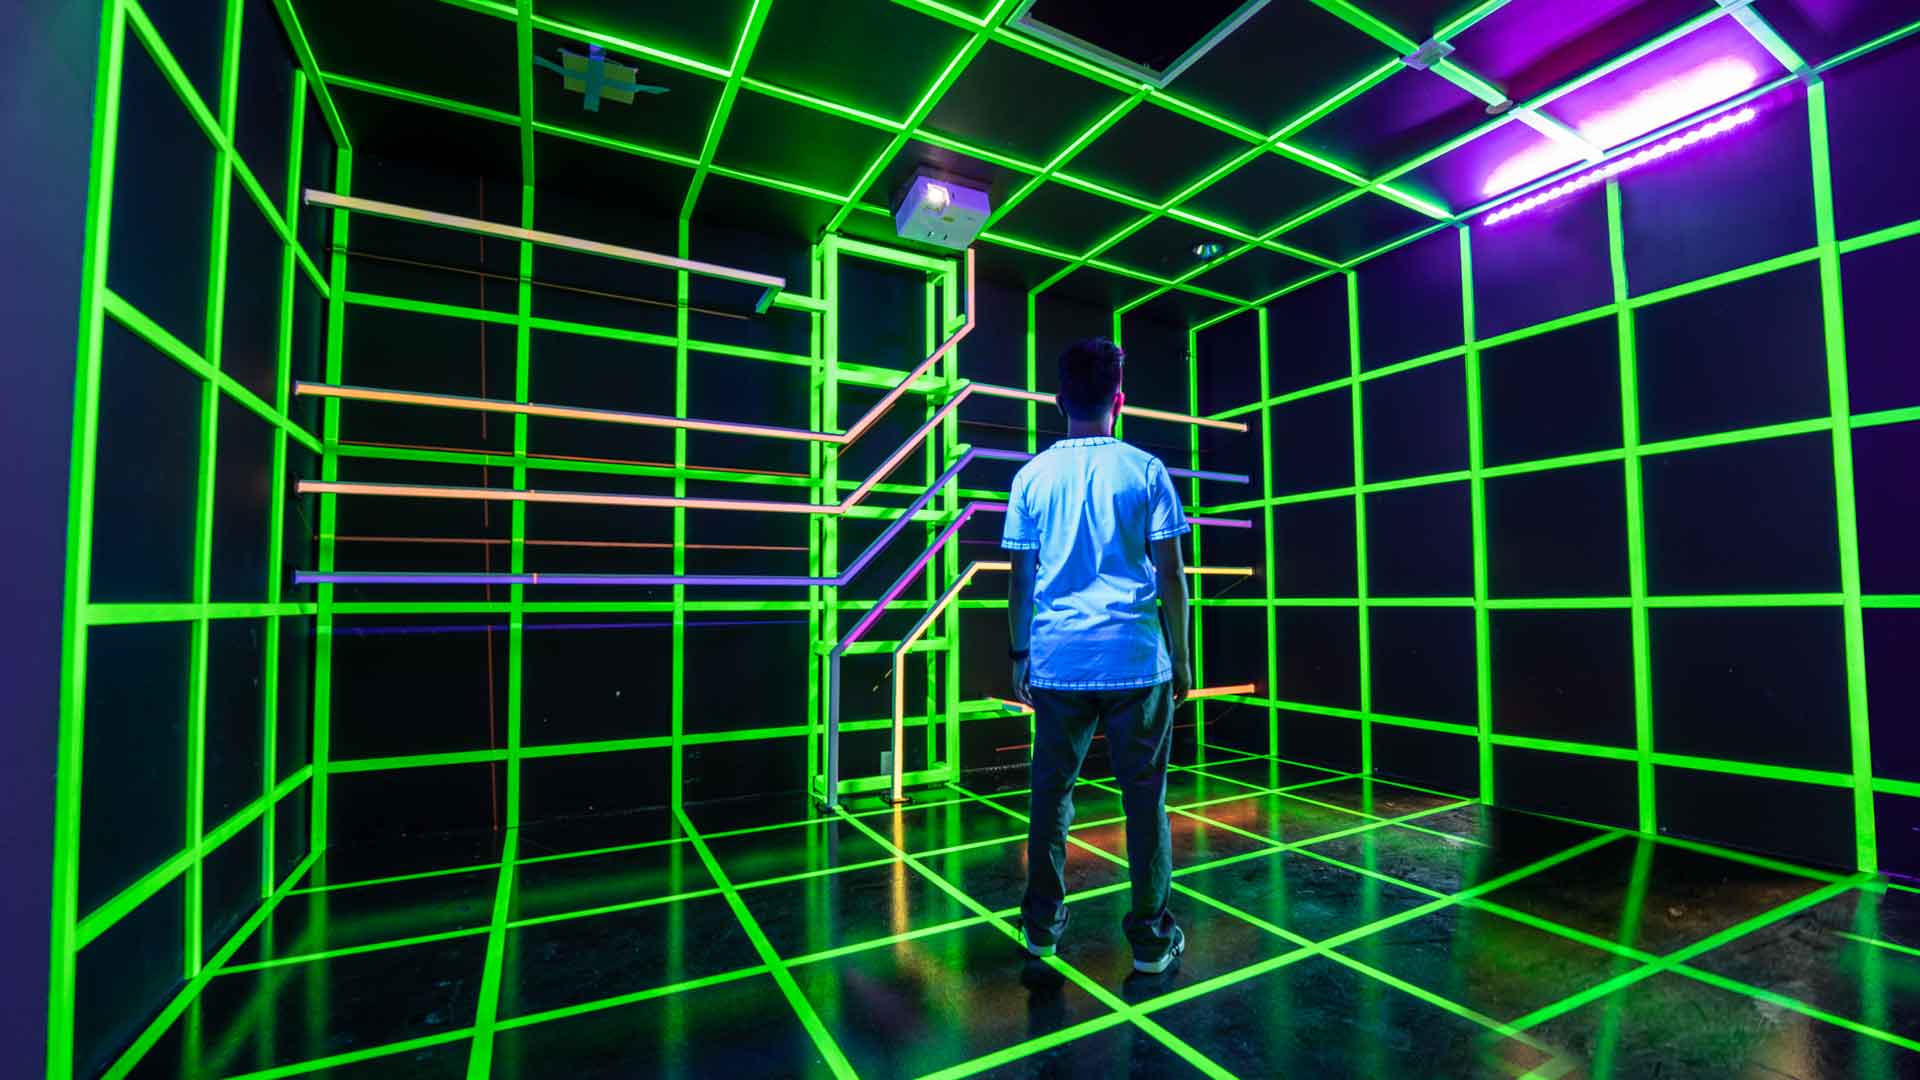 Experiential artainment museum Seismique to debut in Houston